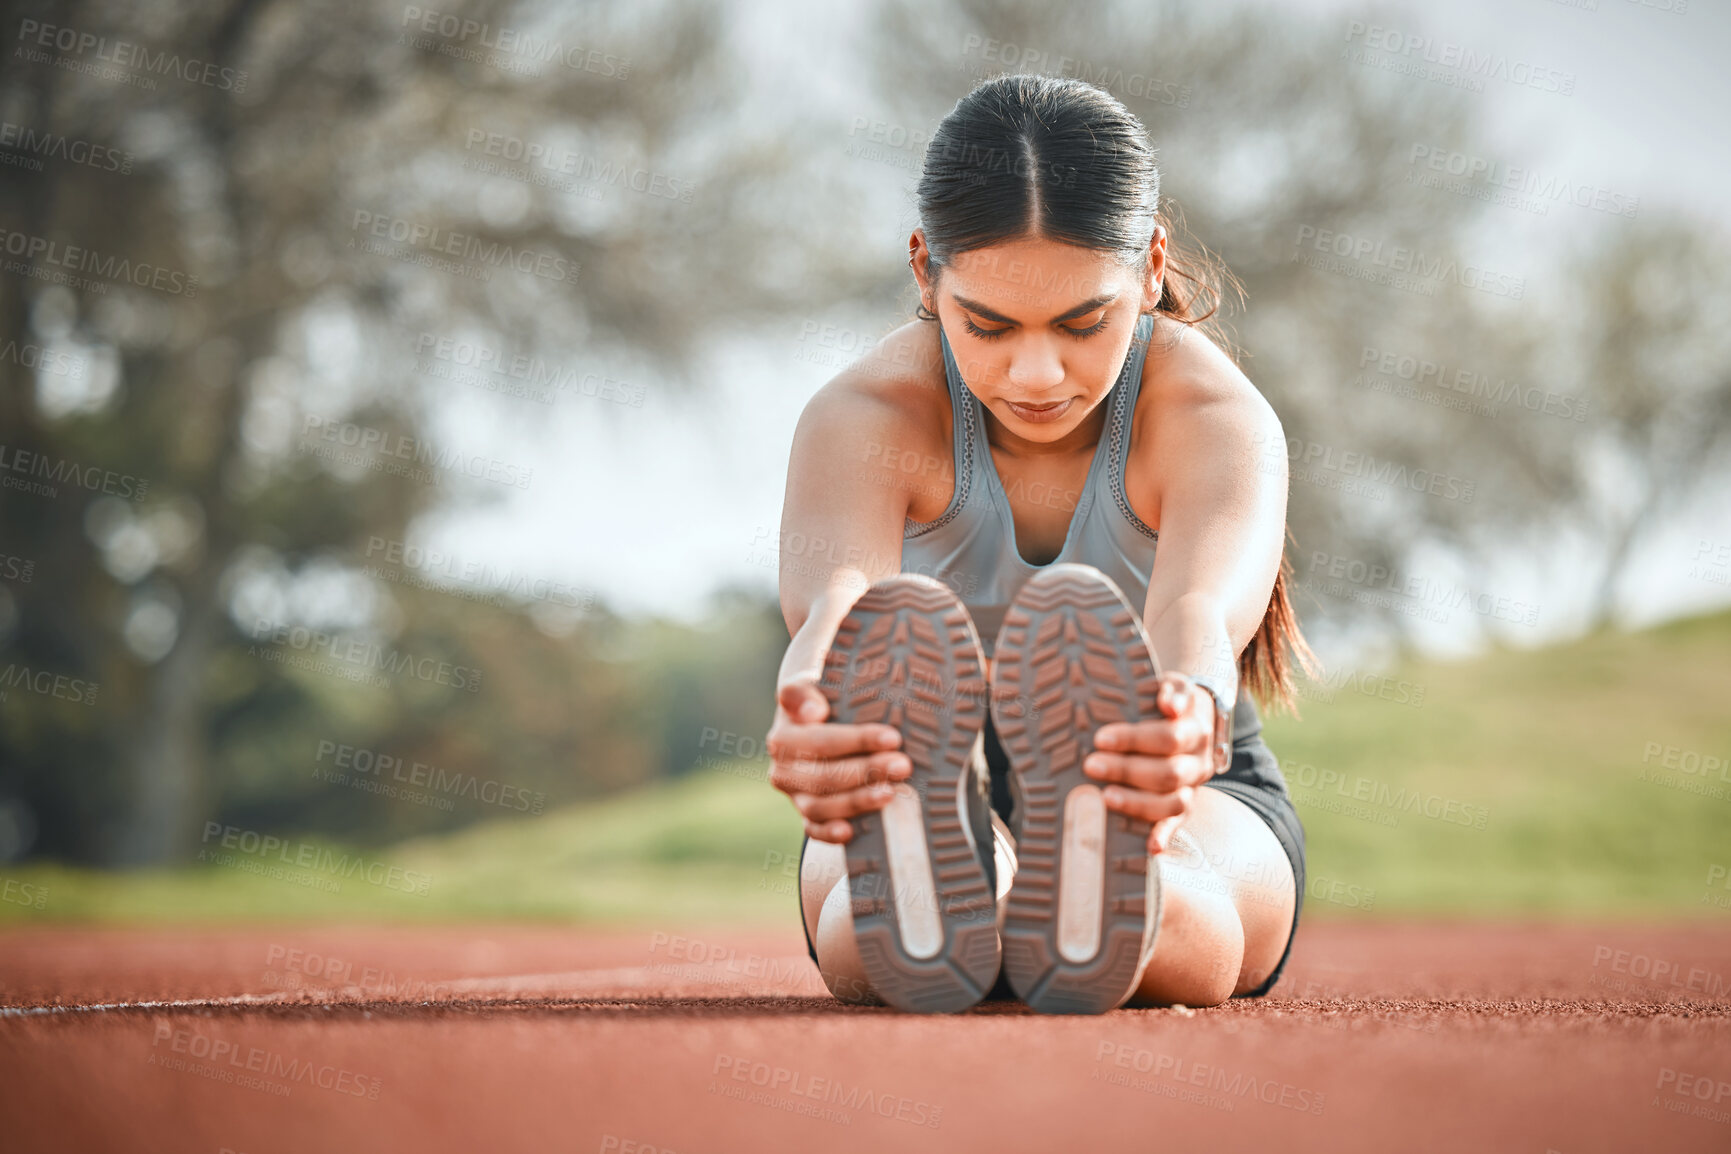 Buy stock photo Shot of a young athlete stretching her legs on a running track outdoors